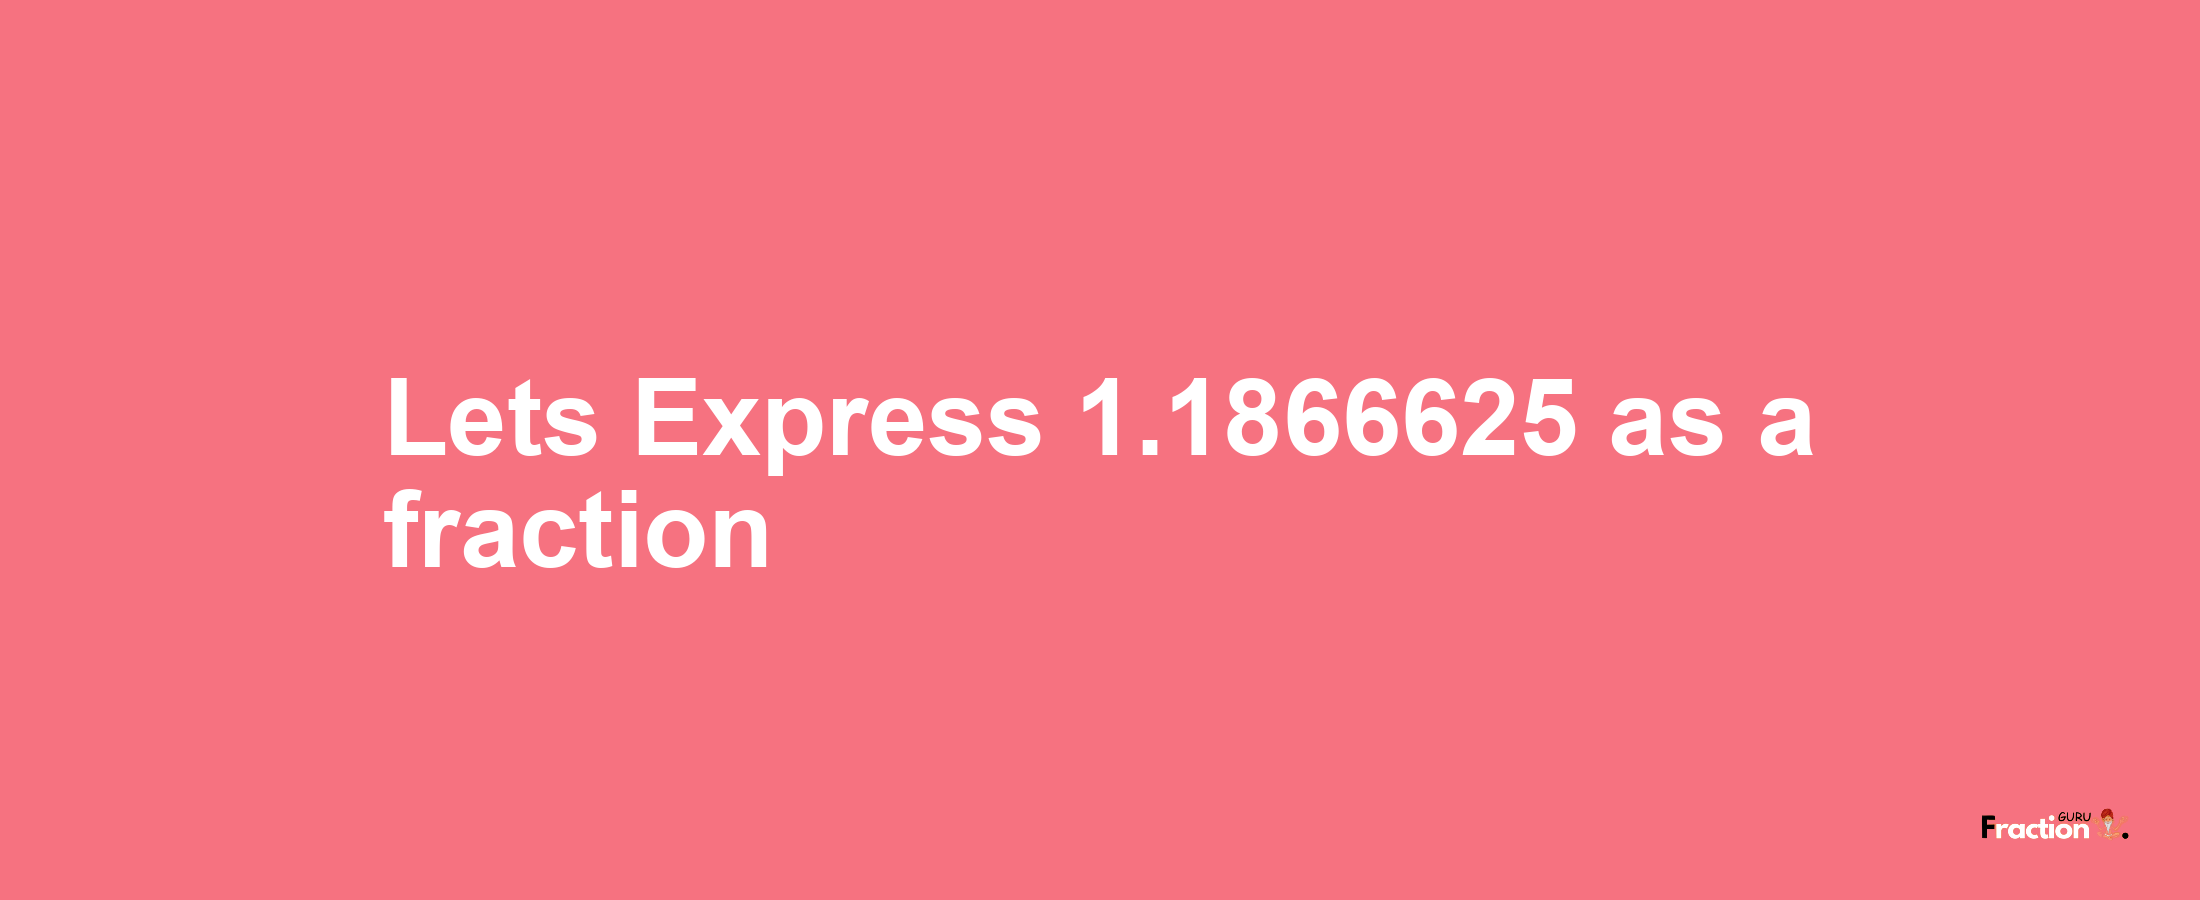 Lets Express 1.1866625 as afraction